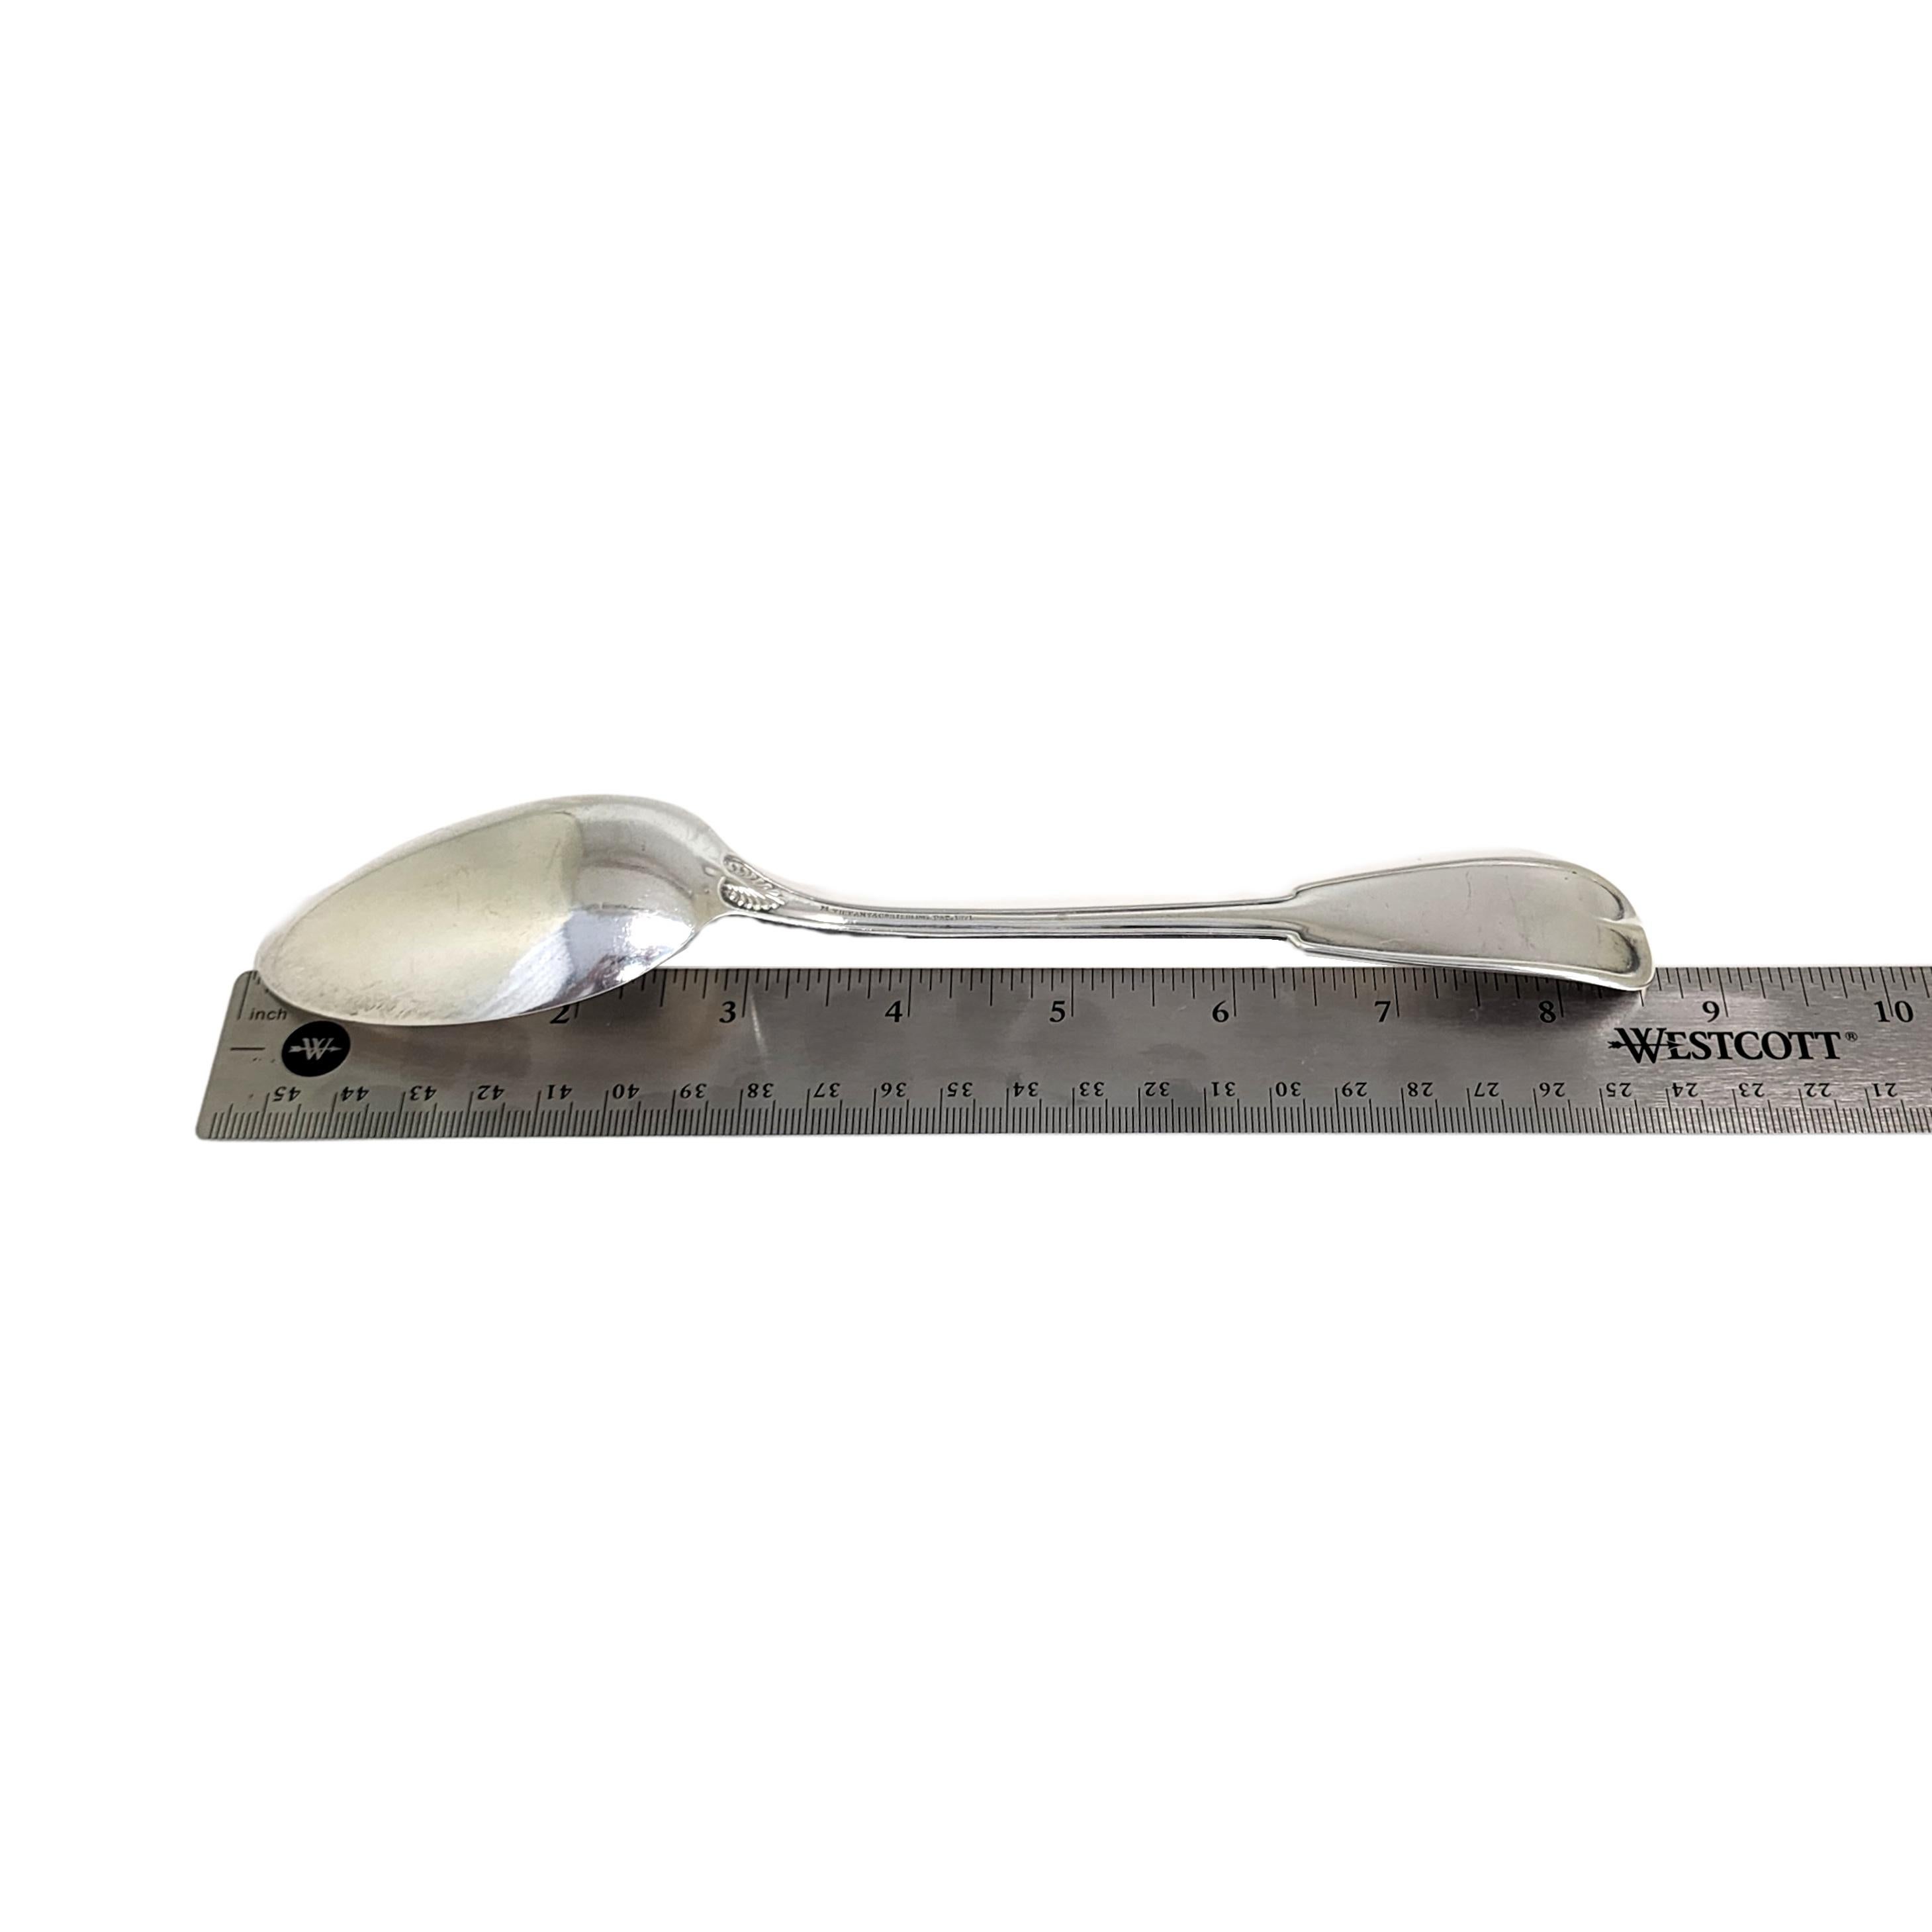 Tiffany & Co Palm Sterling Silver Tablespoon/Serving Spoon with Monogram #12568 For Sale 5